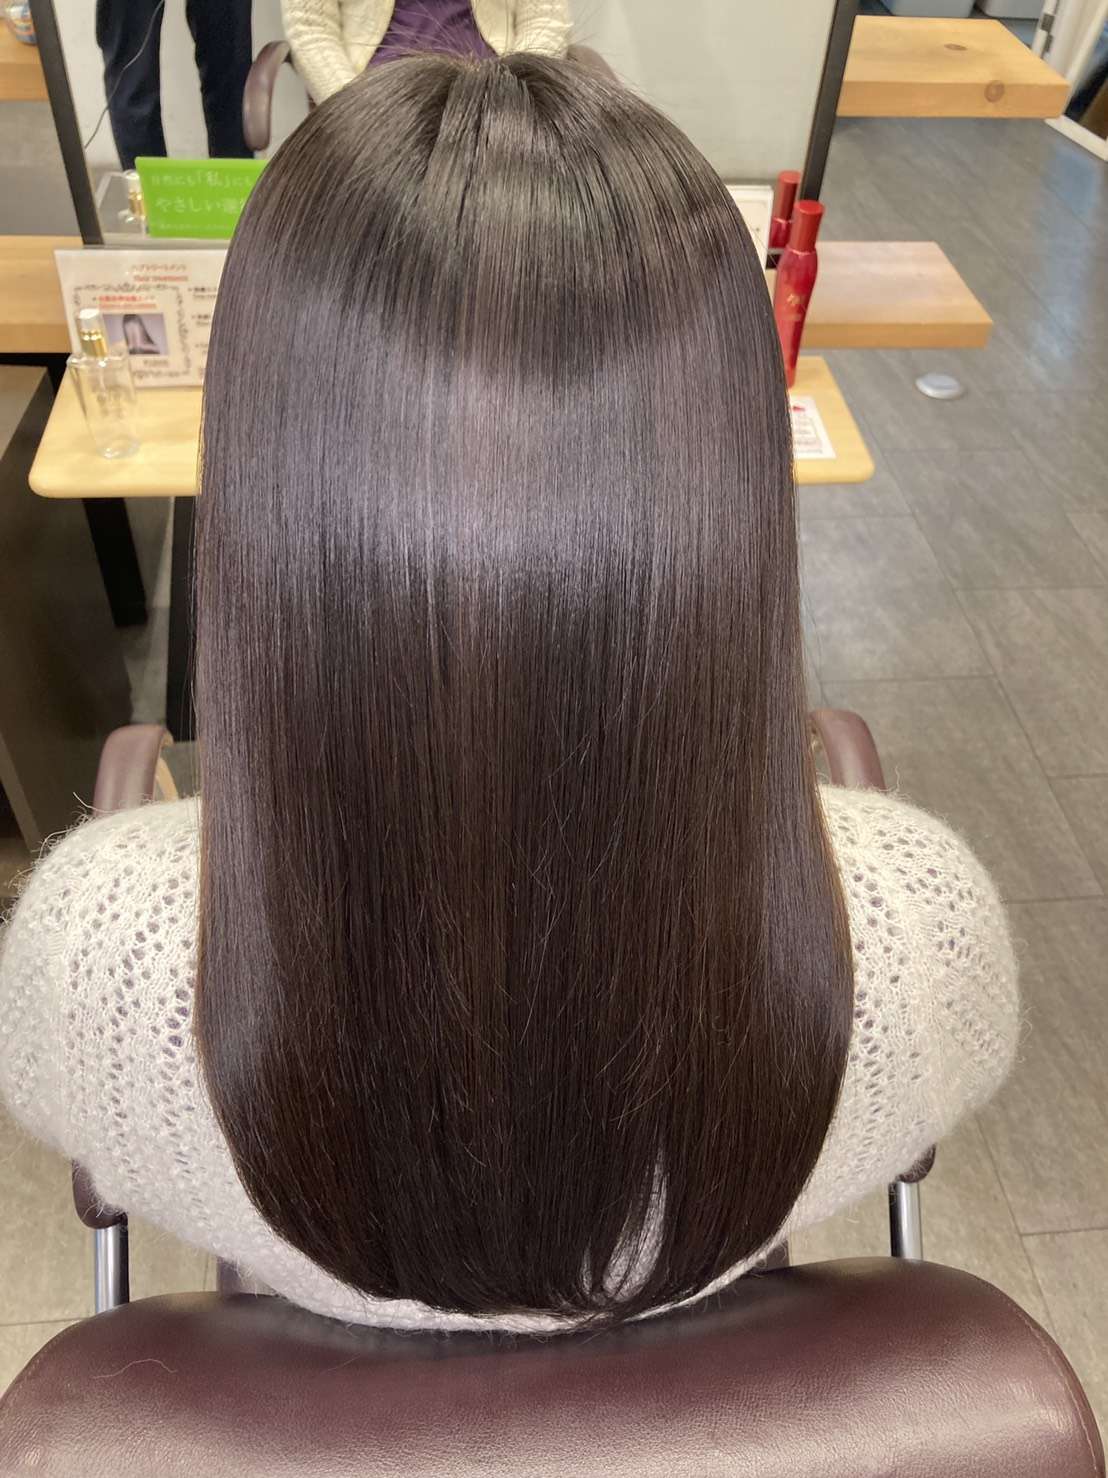 [Nagoya Station x Hair Salon] What is necessary to improve hair swells and dryness?